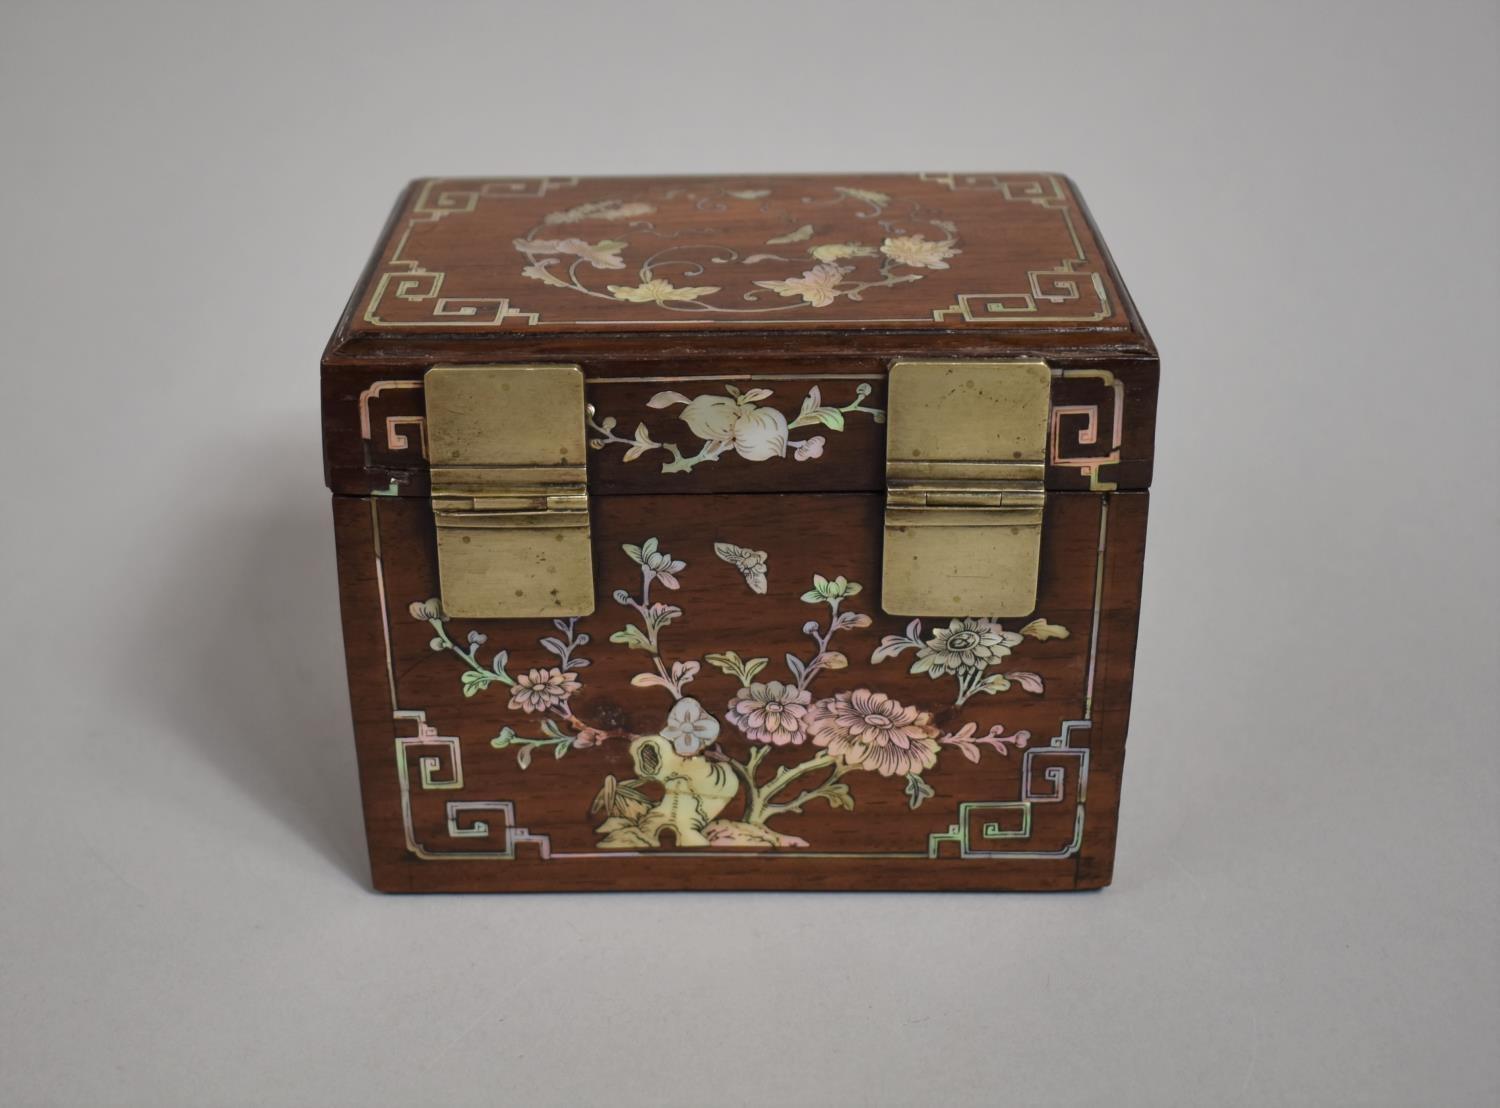 A Chinese Hardwood Mother of Pearl Inlaid Tea Caddy Box Decorated with Fauna, Native Squirrels, Bats - Image 4 of 6